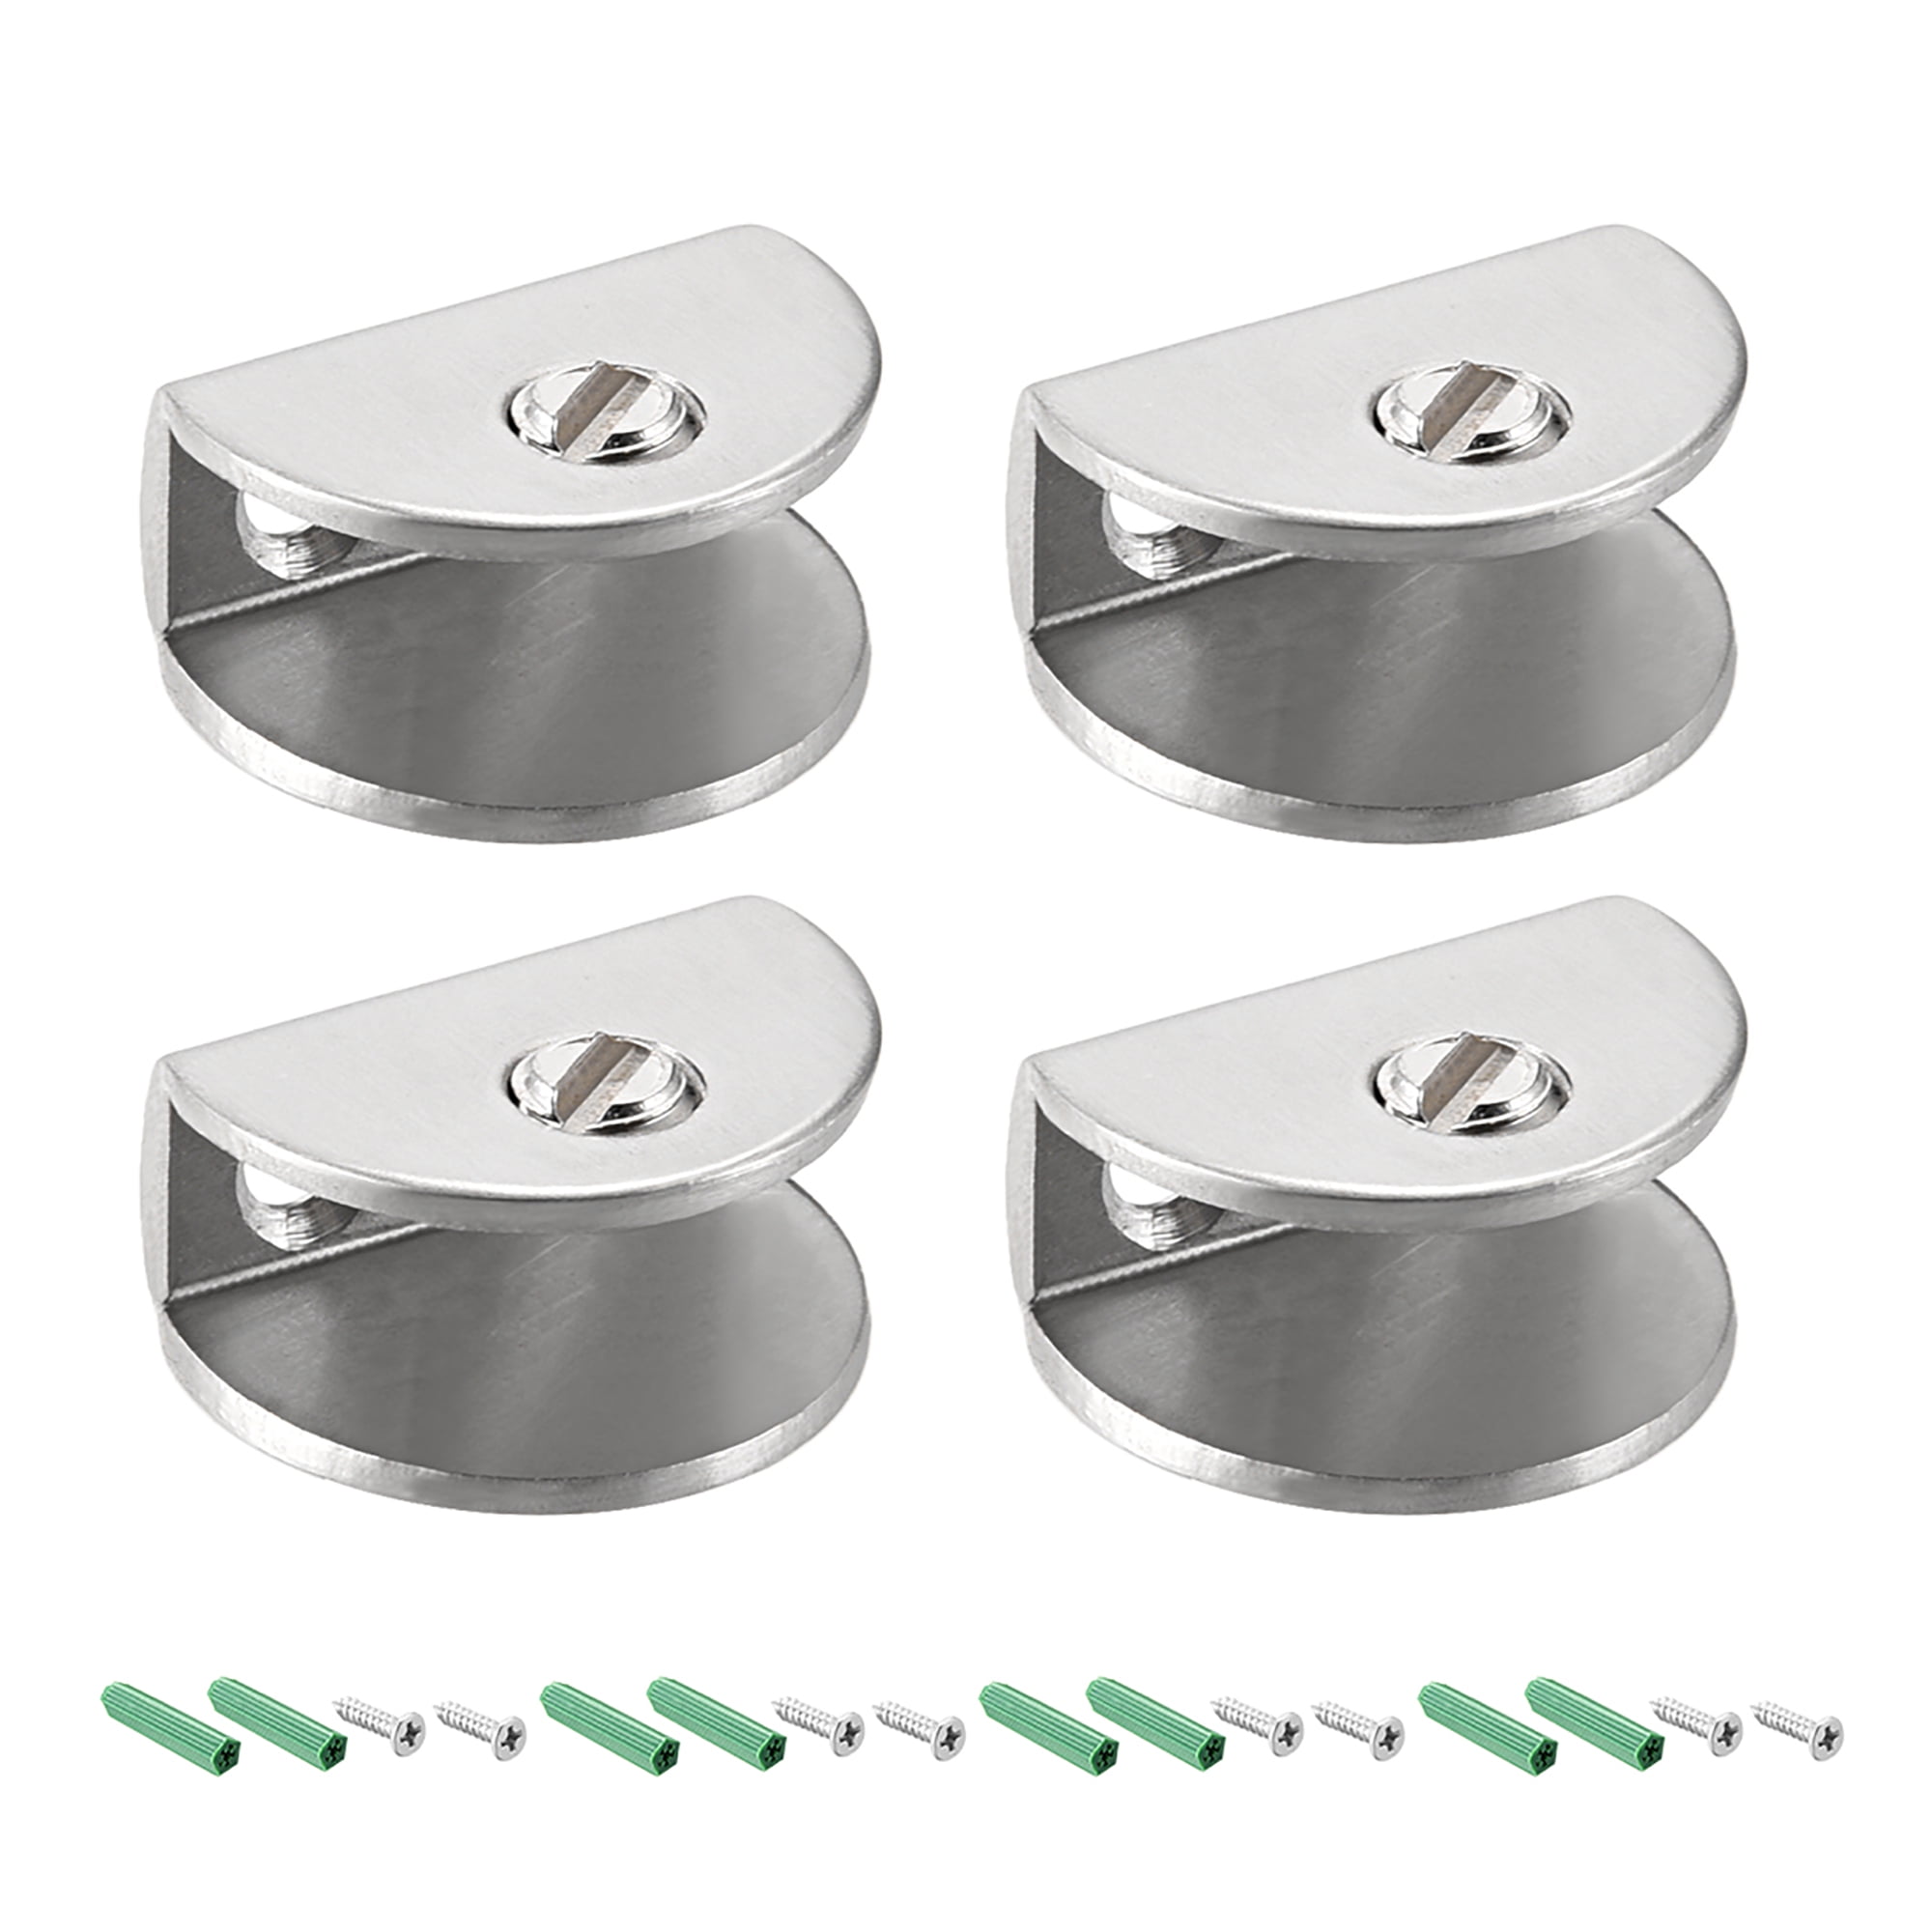 24 x Stainless Steel Glass Holder Glass clamp Flat Connection clamp Holder 6-8mm